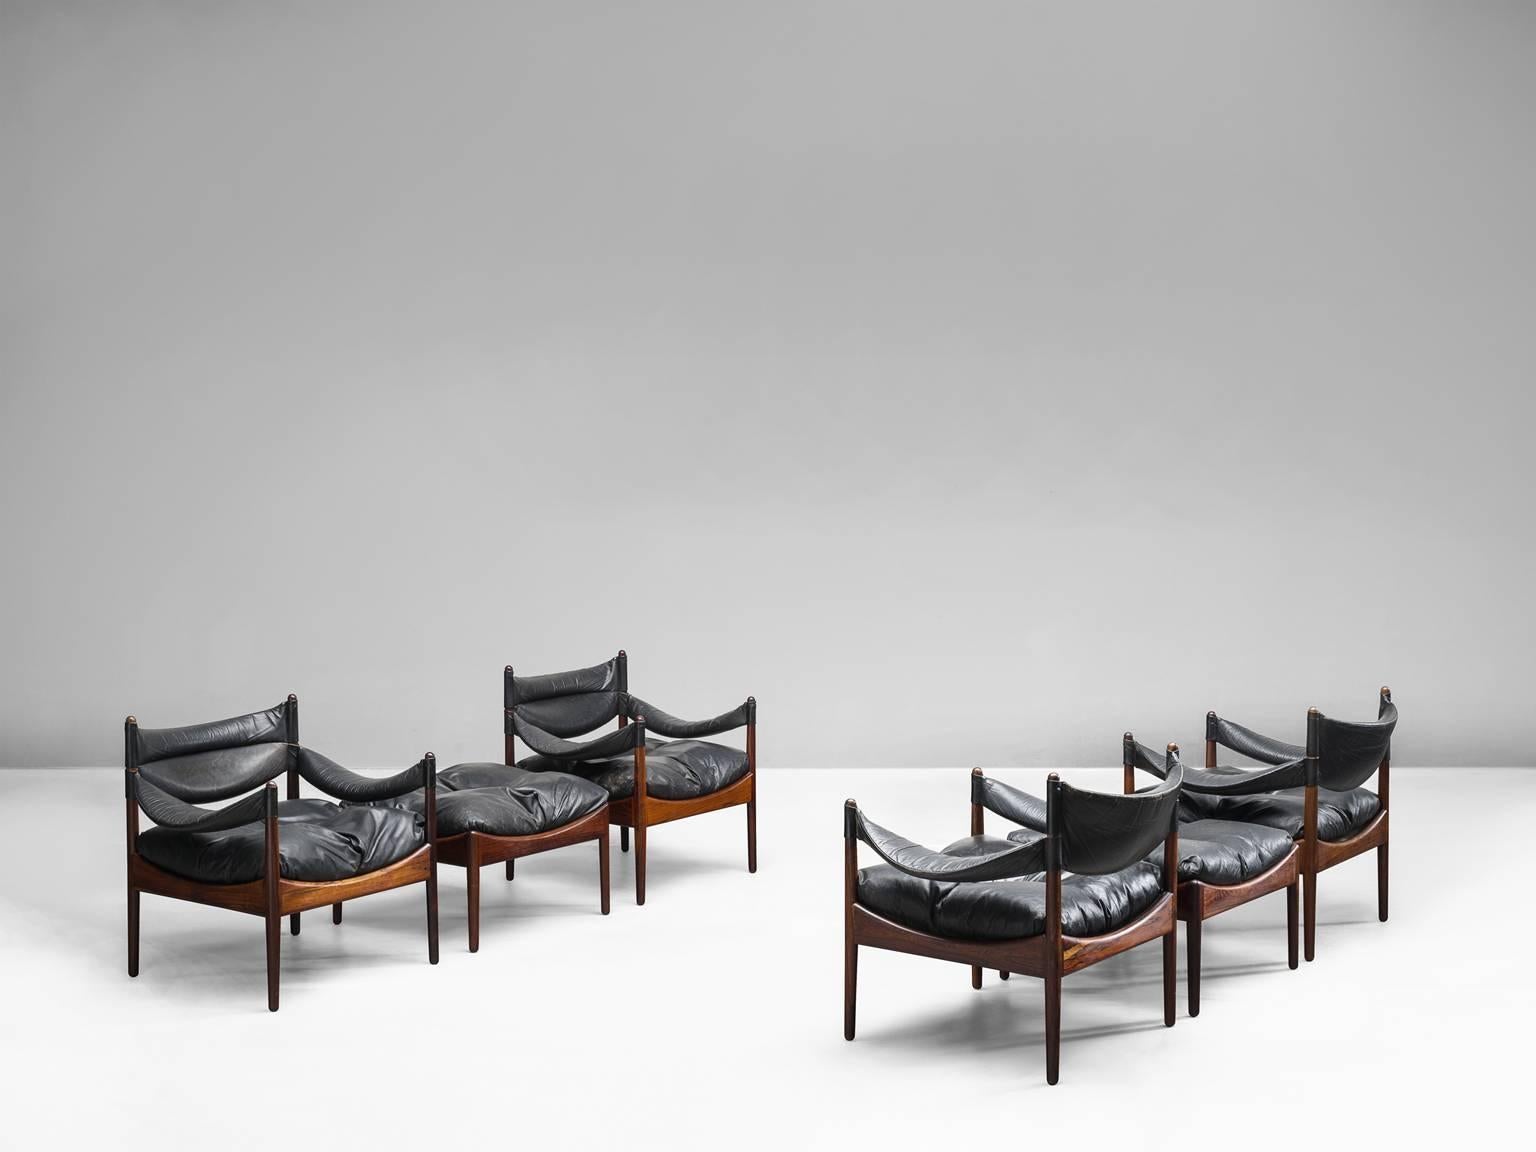 Large set of lounge chairs by Kristian Solmer Vedel, in rosewood and black leather. Design 'Modus', manufactured by Søren Willadsen, Denmark, 1960s.

This highly comfortable set of four armchairs is provided with two matching footstools. The